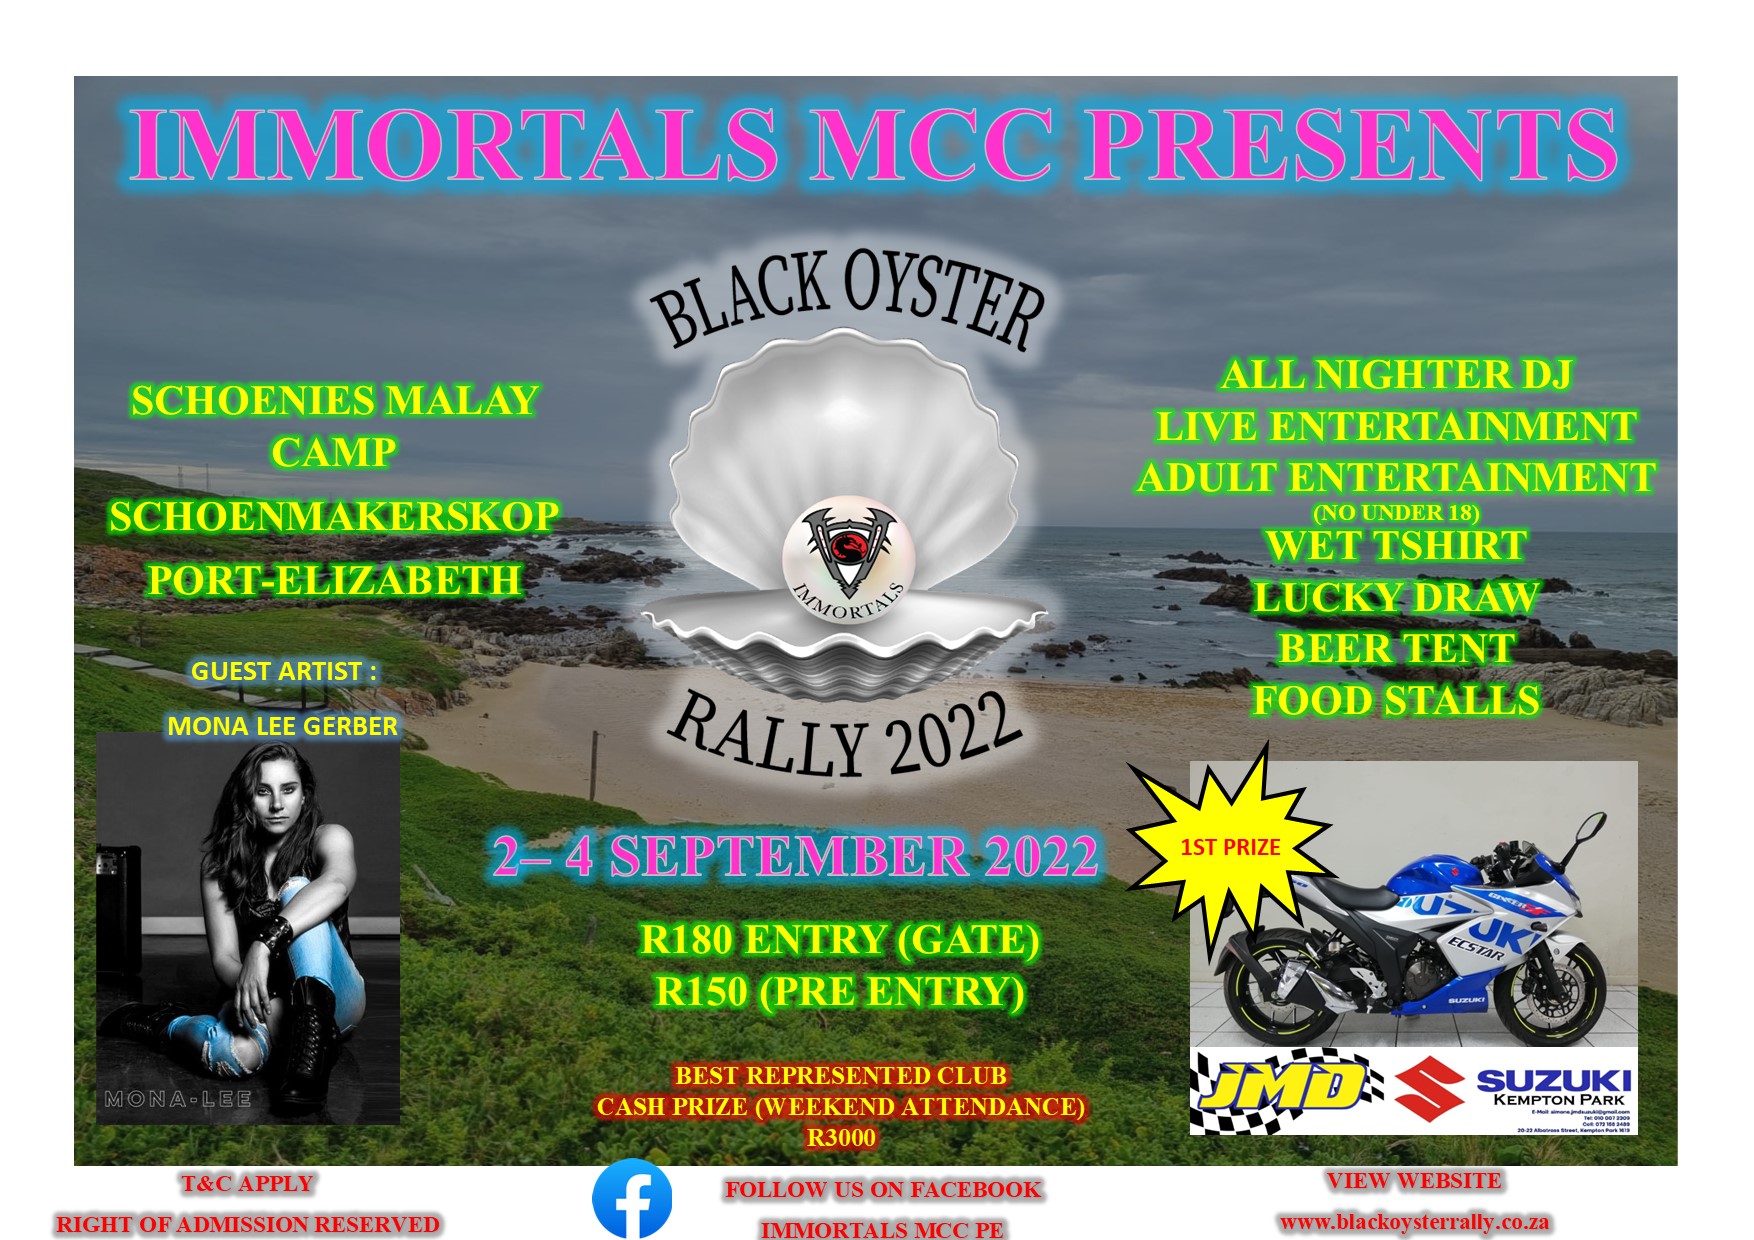 BLACK OYSTER SAVE THE DATE 2022 WITH ENTRY PRICE